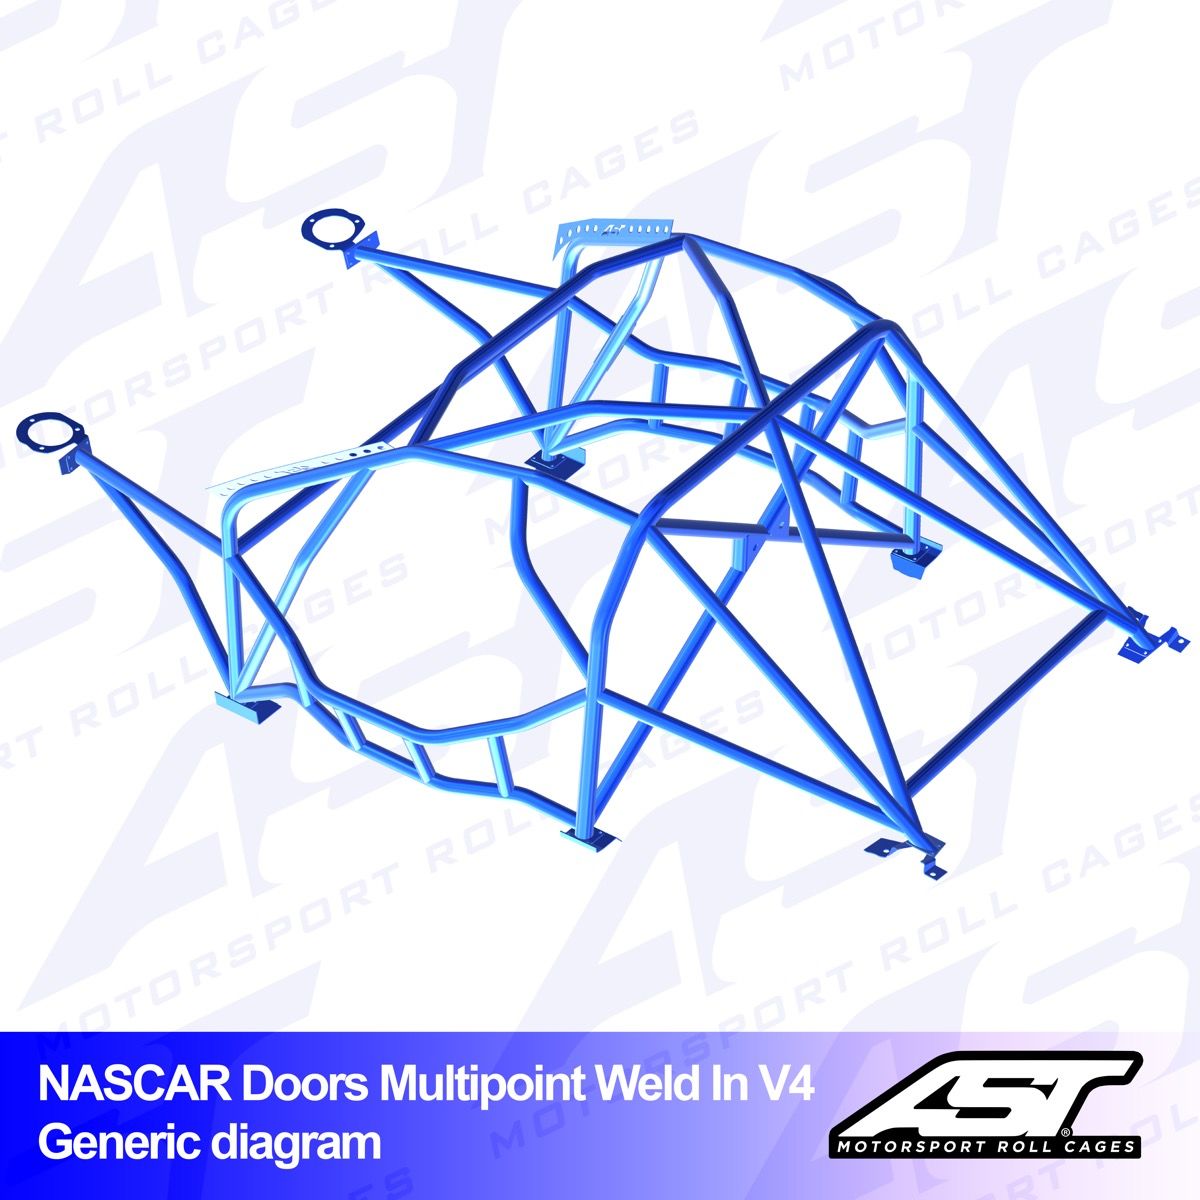 Roll Cage BMW (E92) 3-Series 2-doors Coupe RWD MULTIPOINT WELD IN V4 NASCAR-door for drift